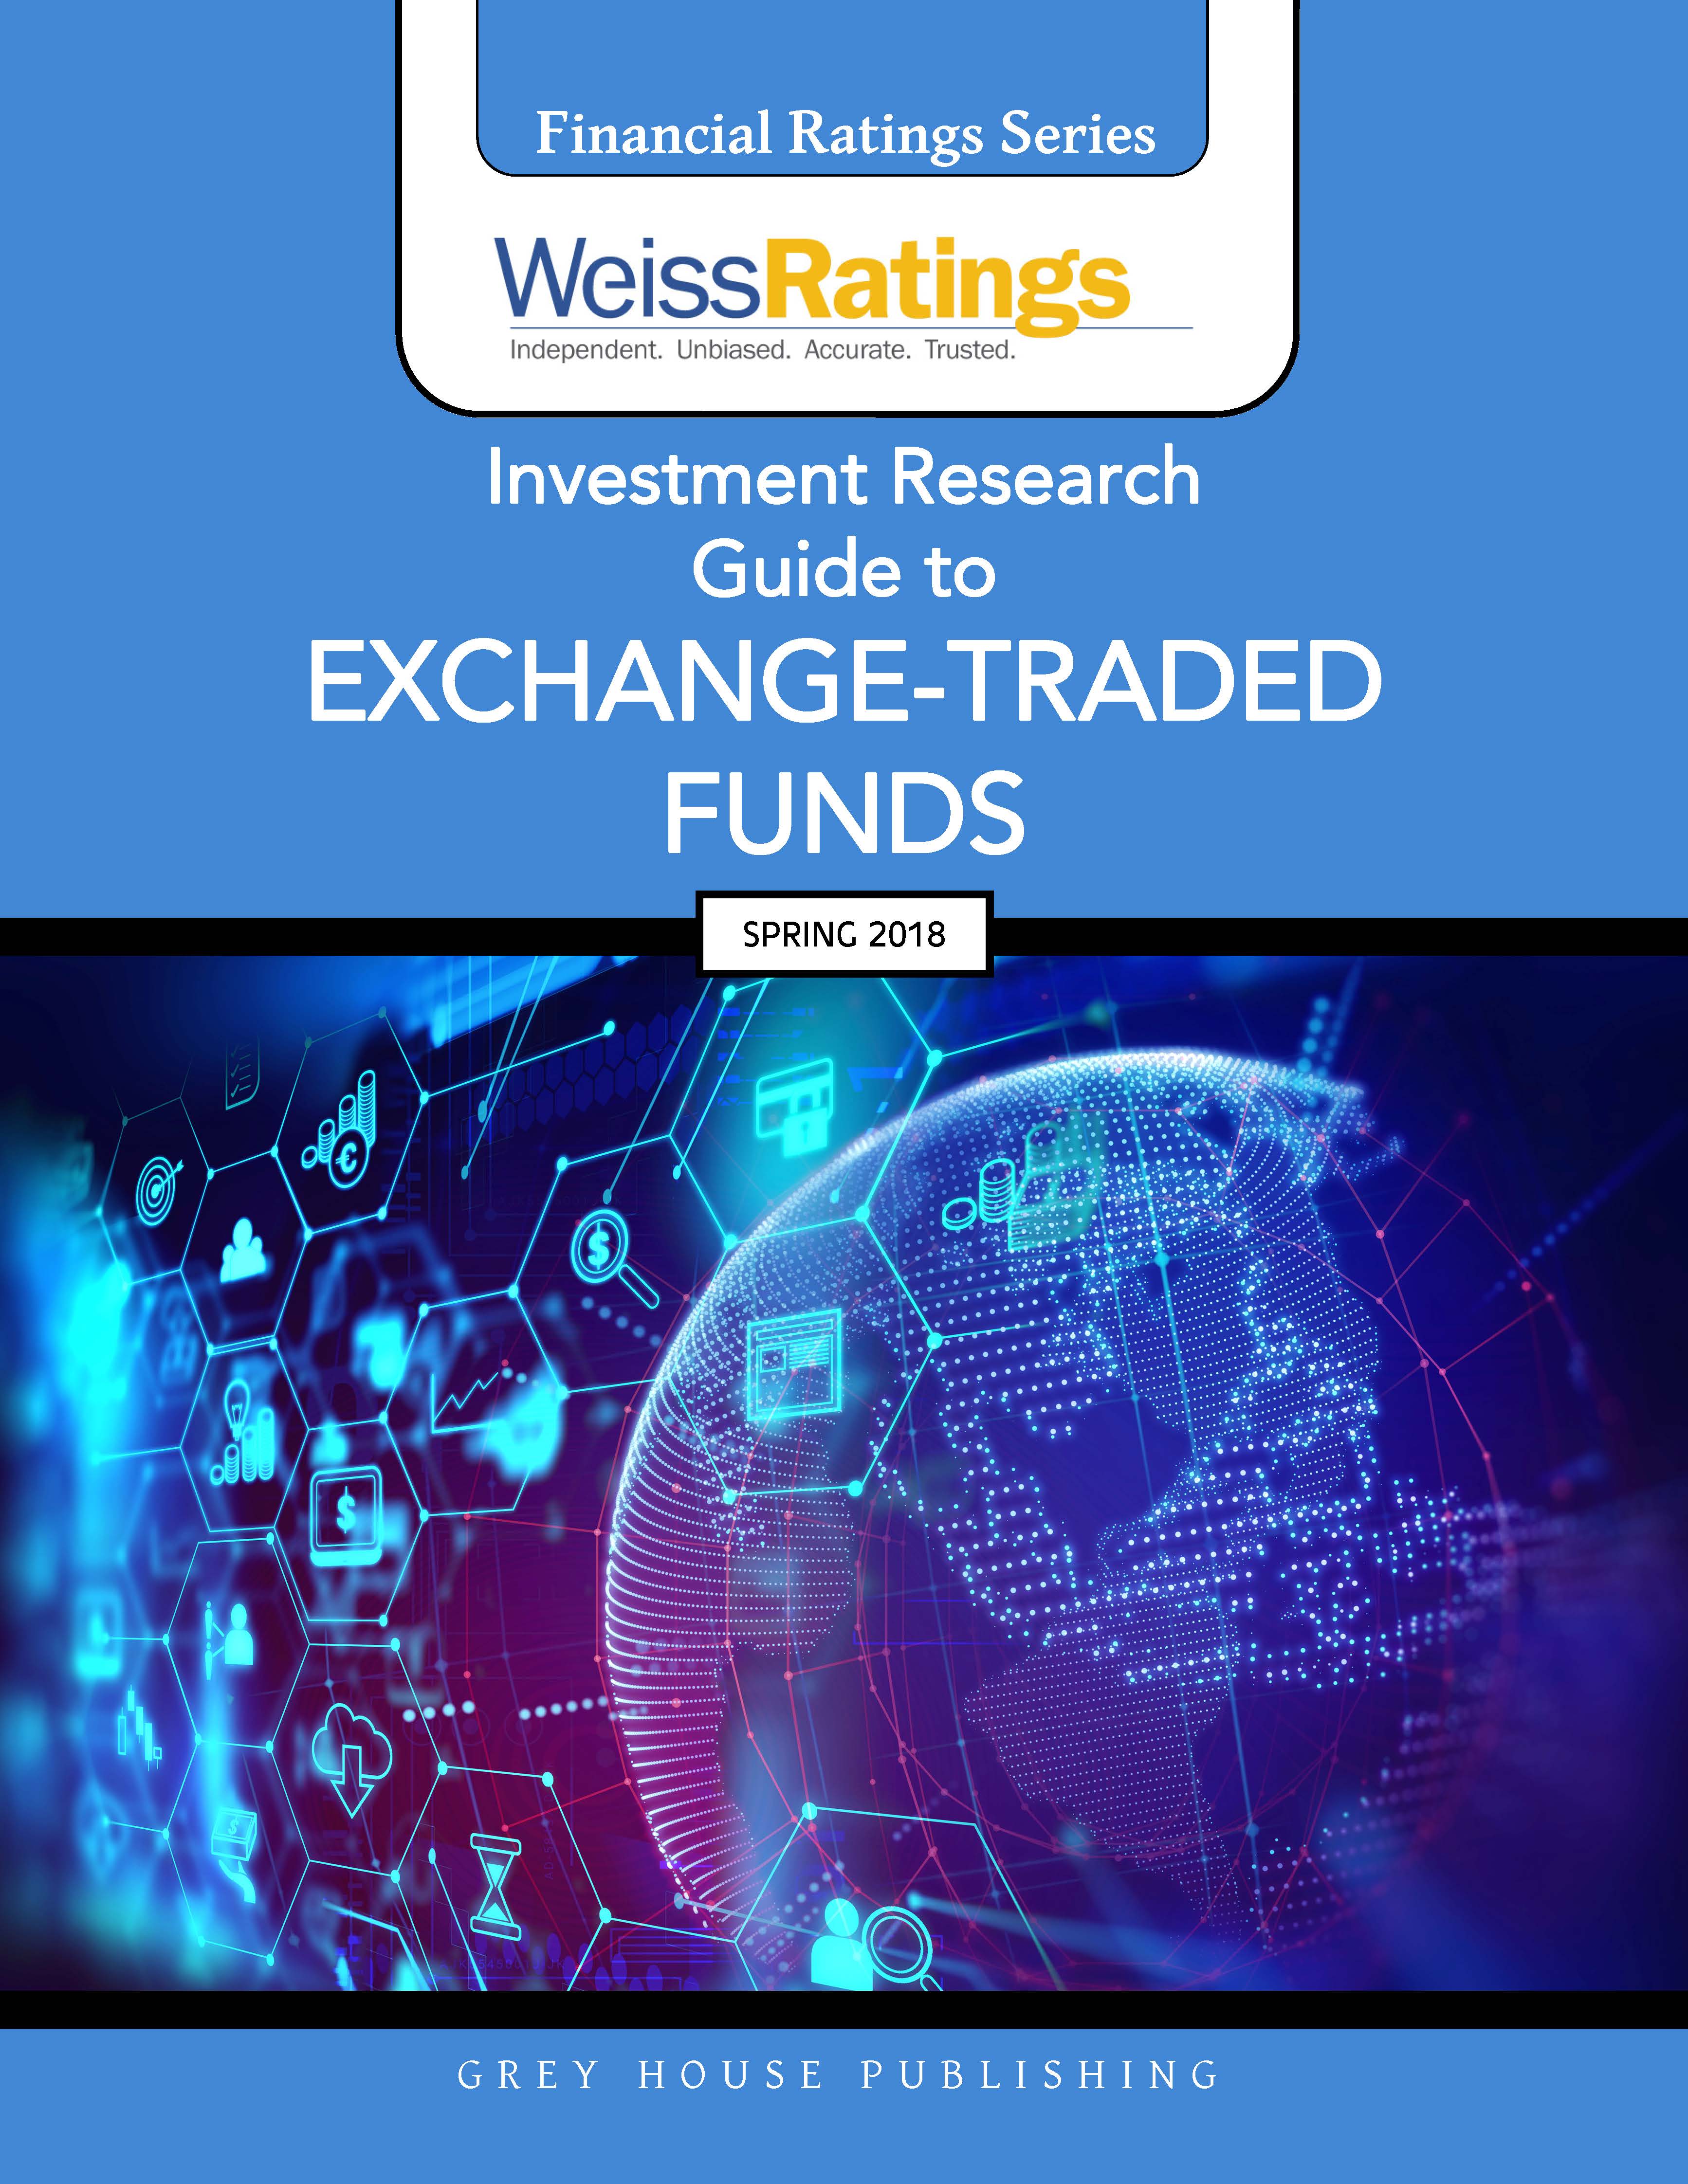 Weiss Ratings Investment Research Guide to Exchange-Traded Funds